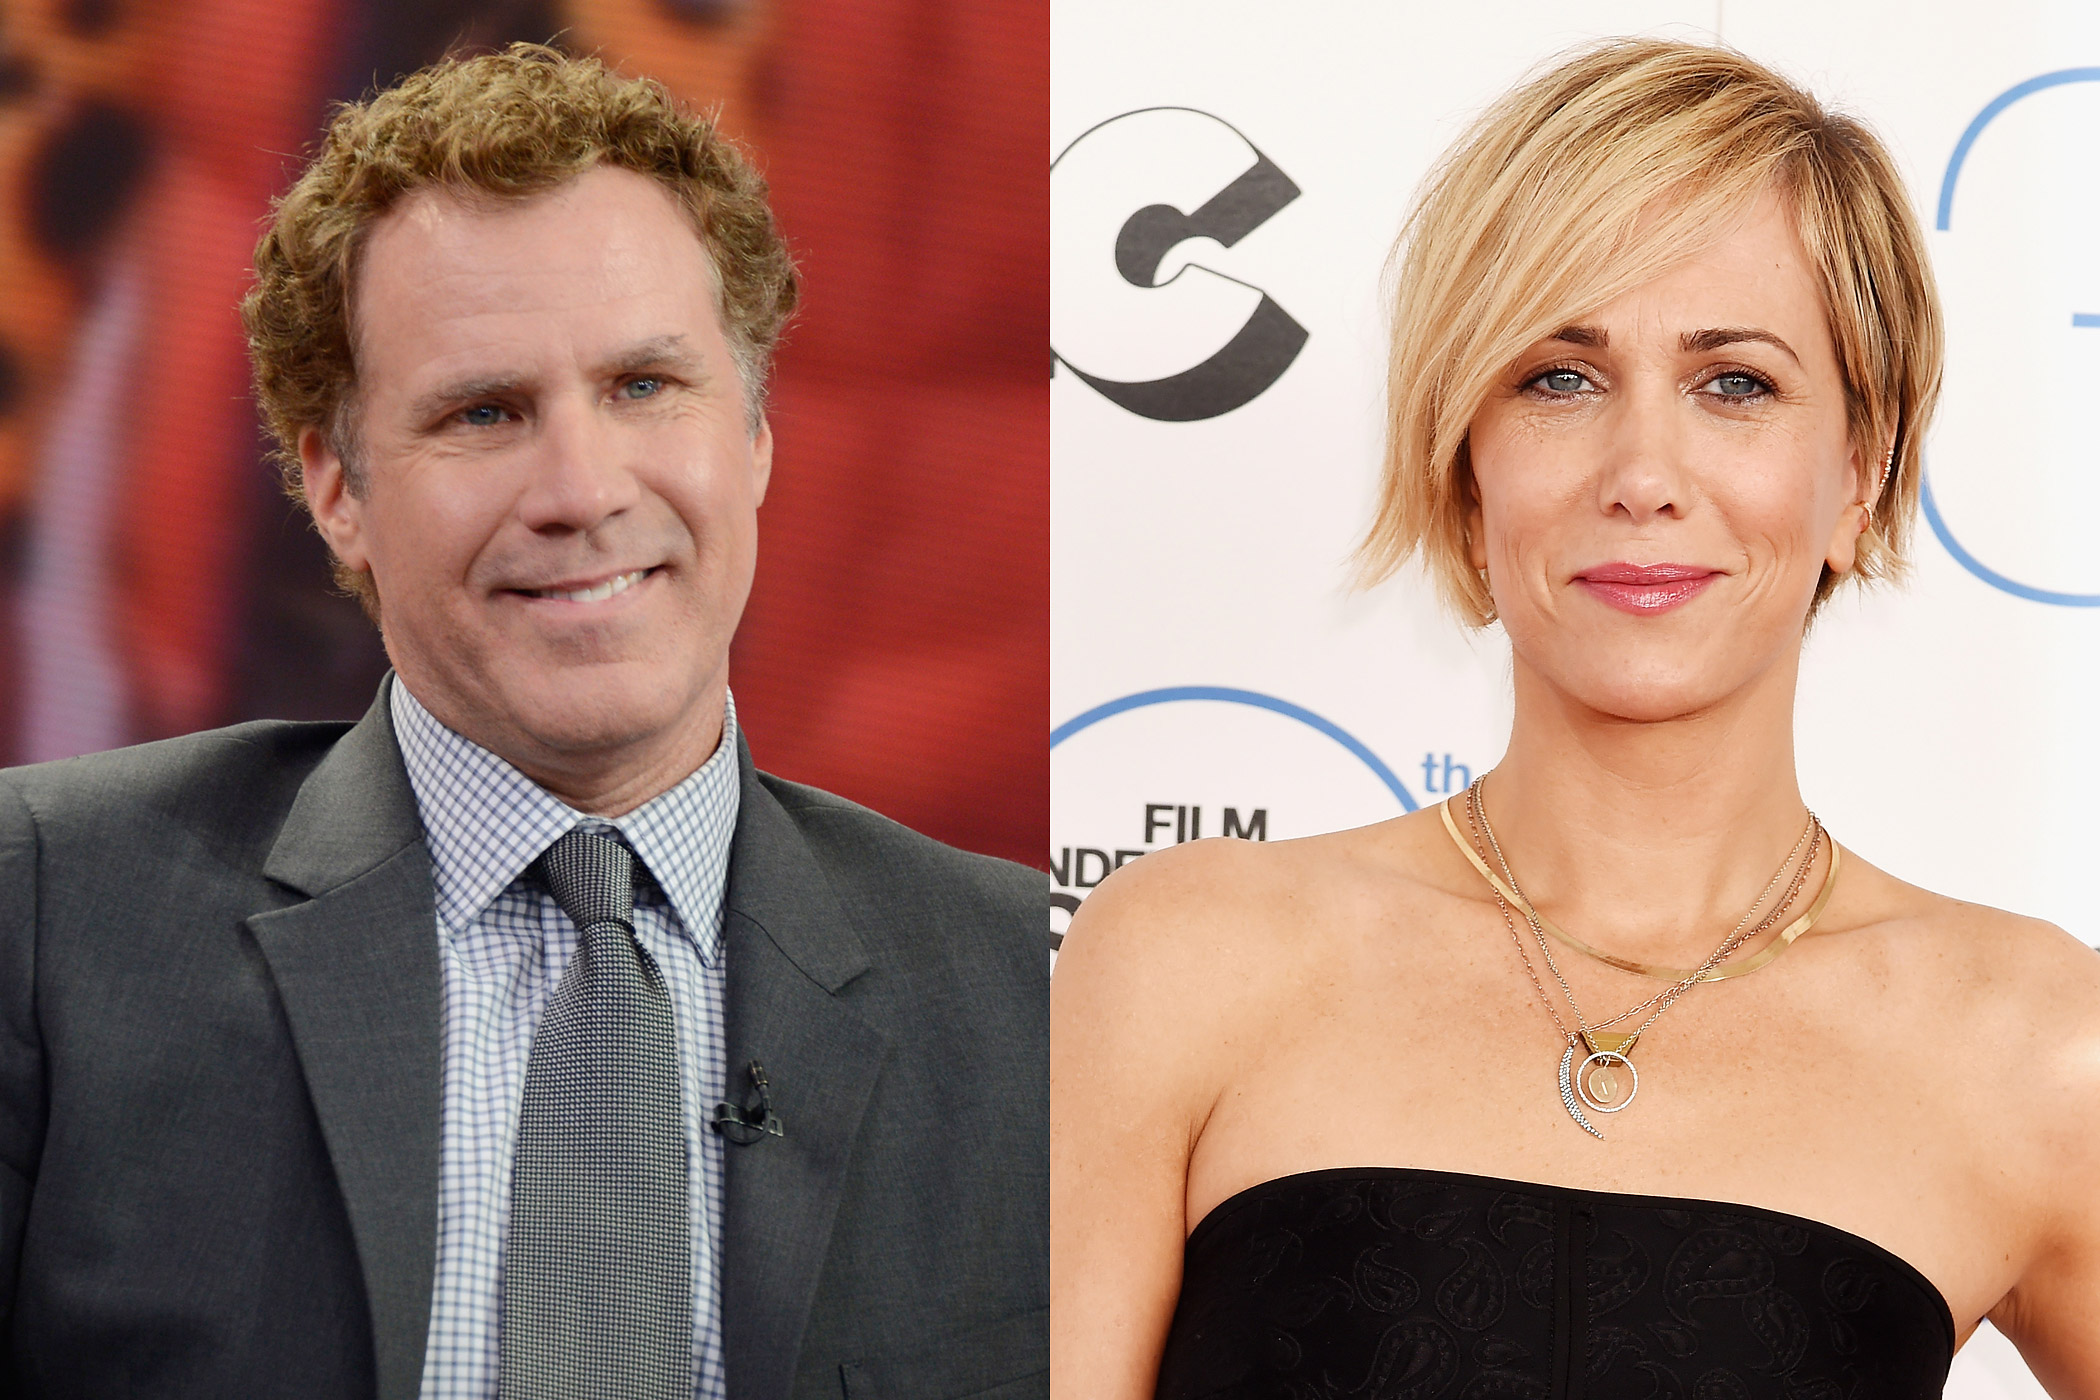 From left: Will Ferrell and Kristen Wiig (Getty Images (2))